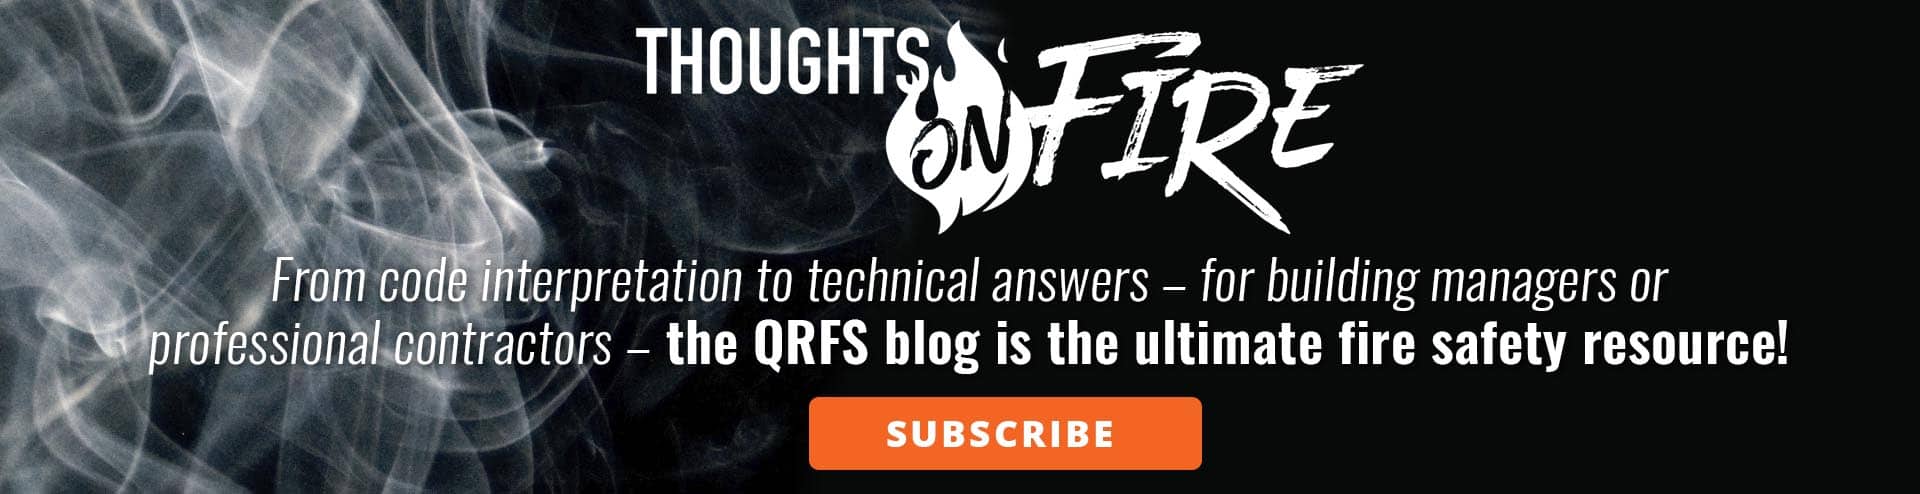 Subscribe to the QRFS Newsletter